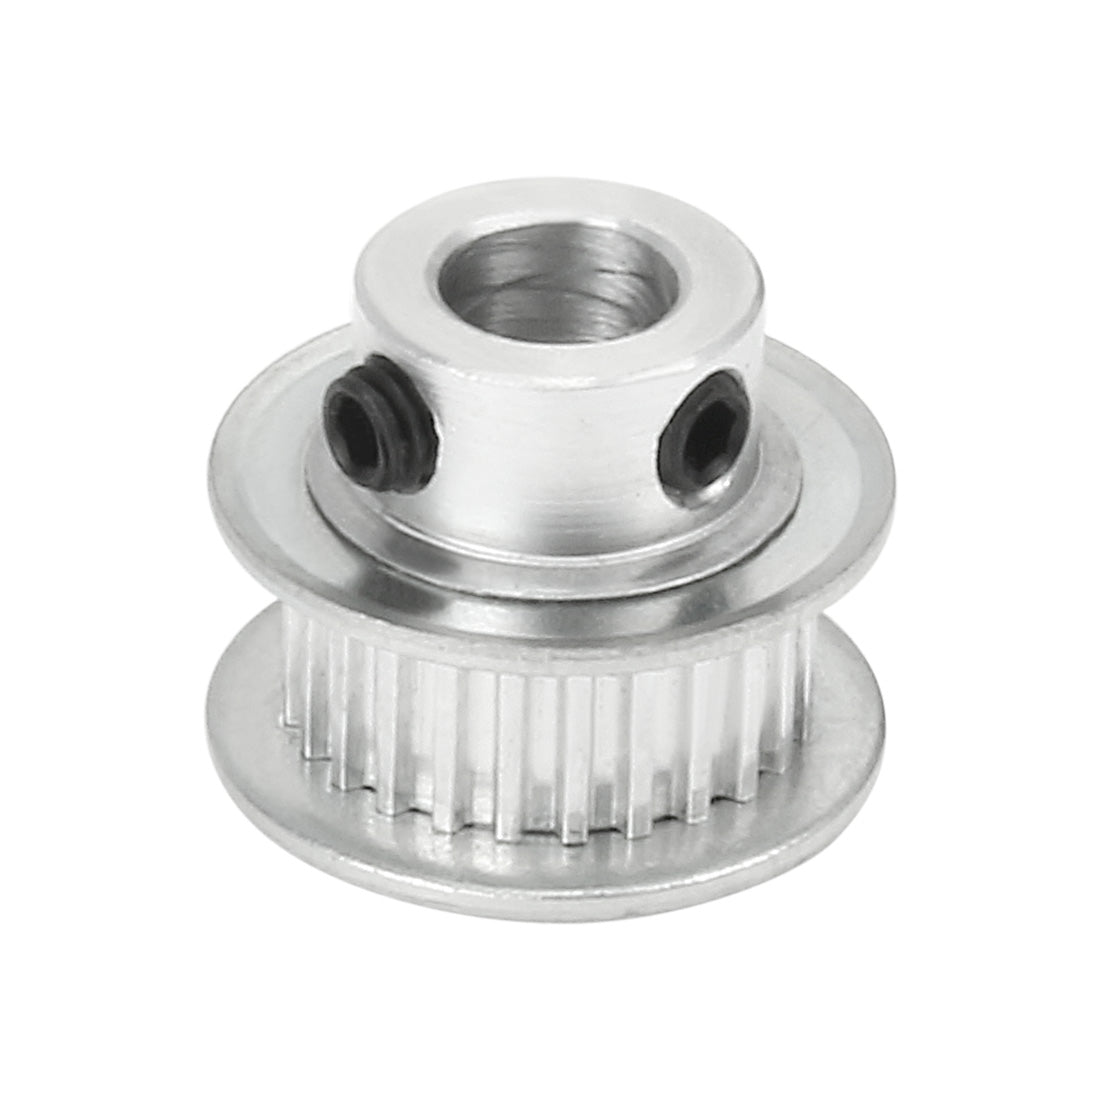 uxcell Uxcell Aluminum MXL 25 Teeth mm Bore Timing Belt Idler Pulley Flange Synchronous Wheel for 6mm Belt 3D Printer CNC